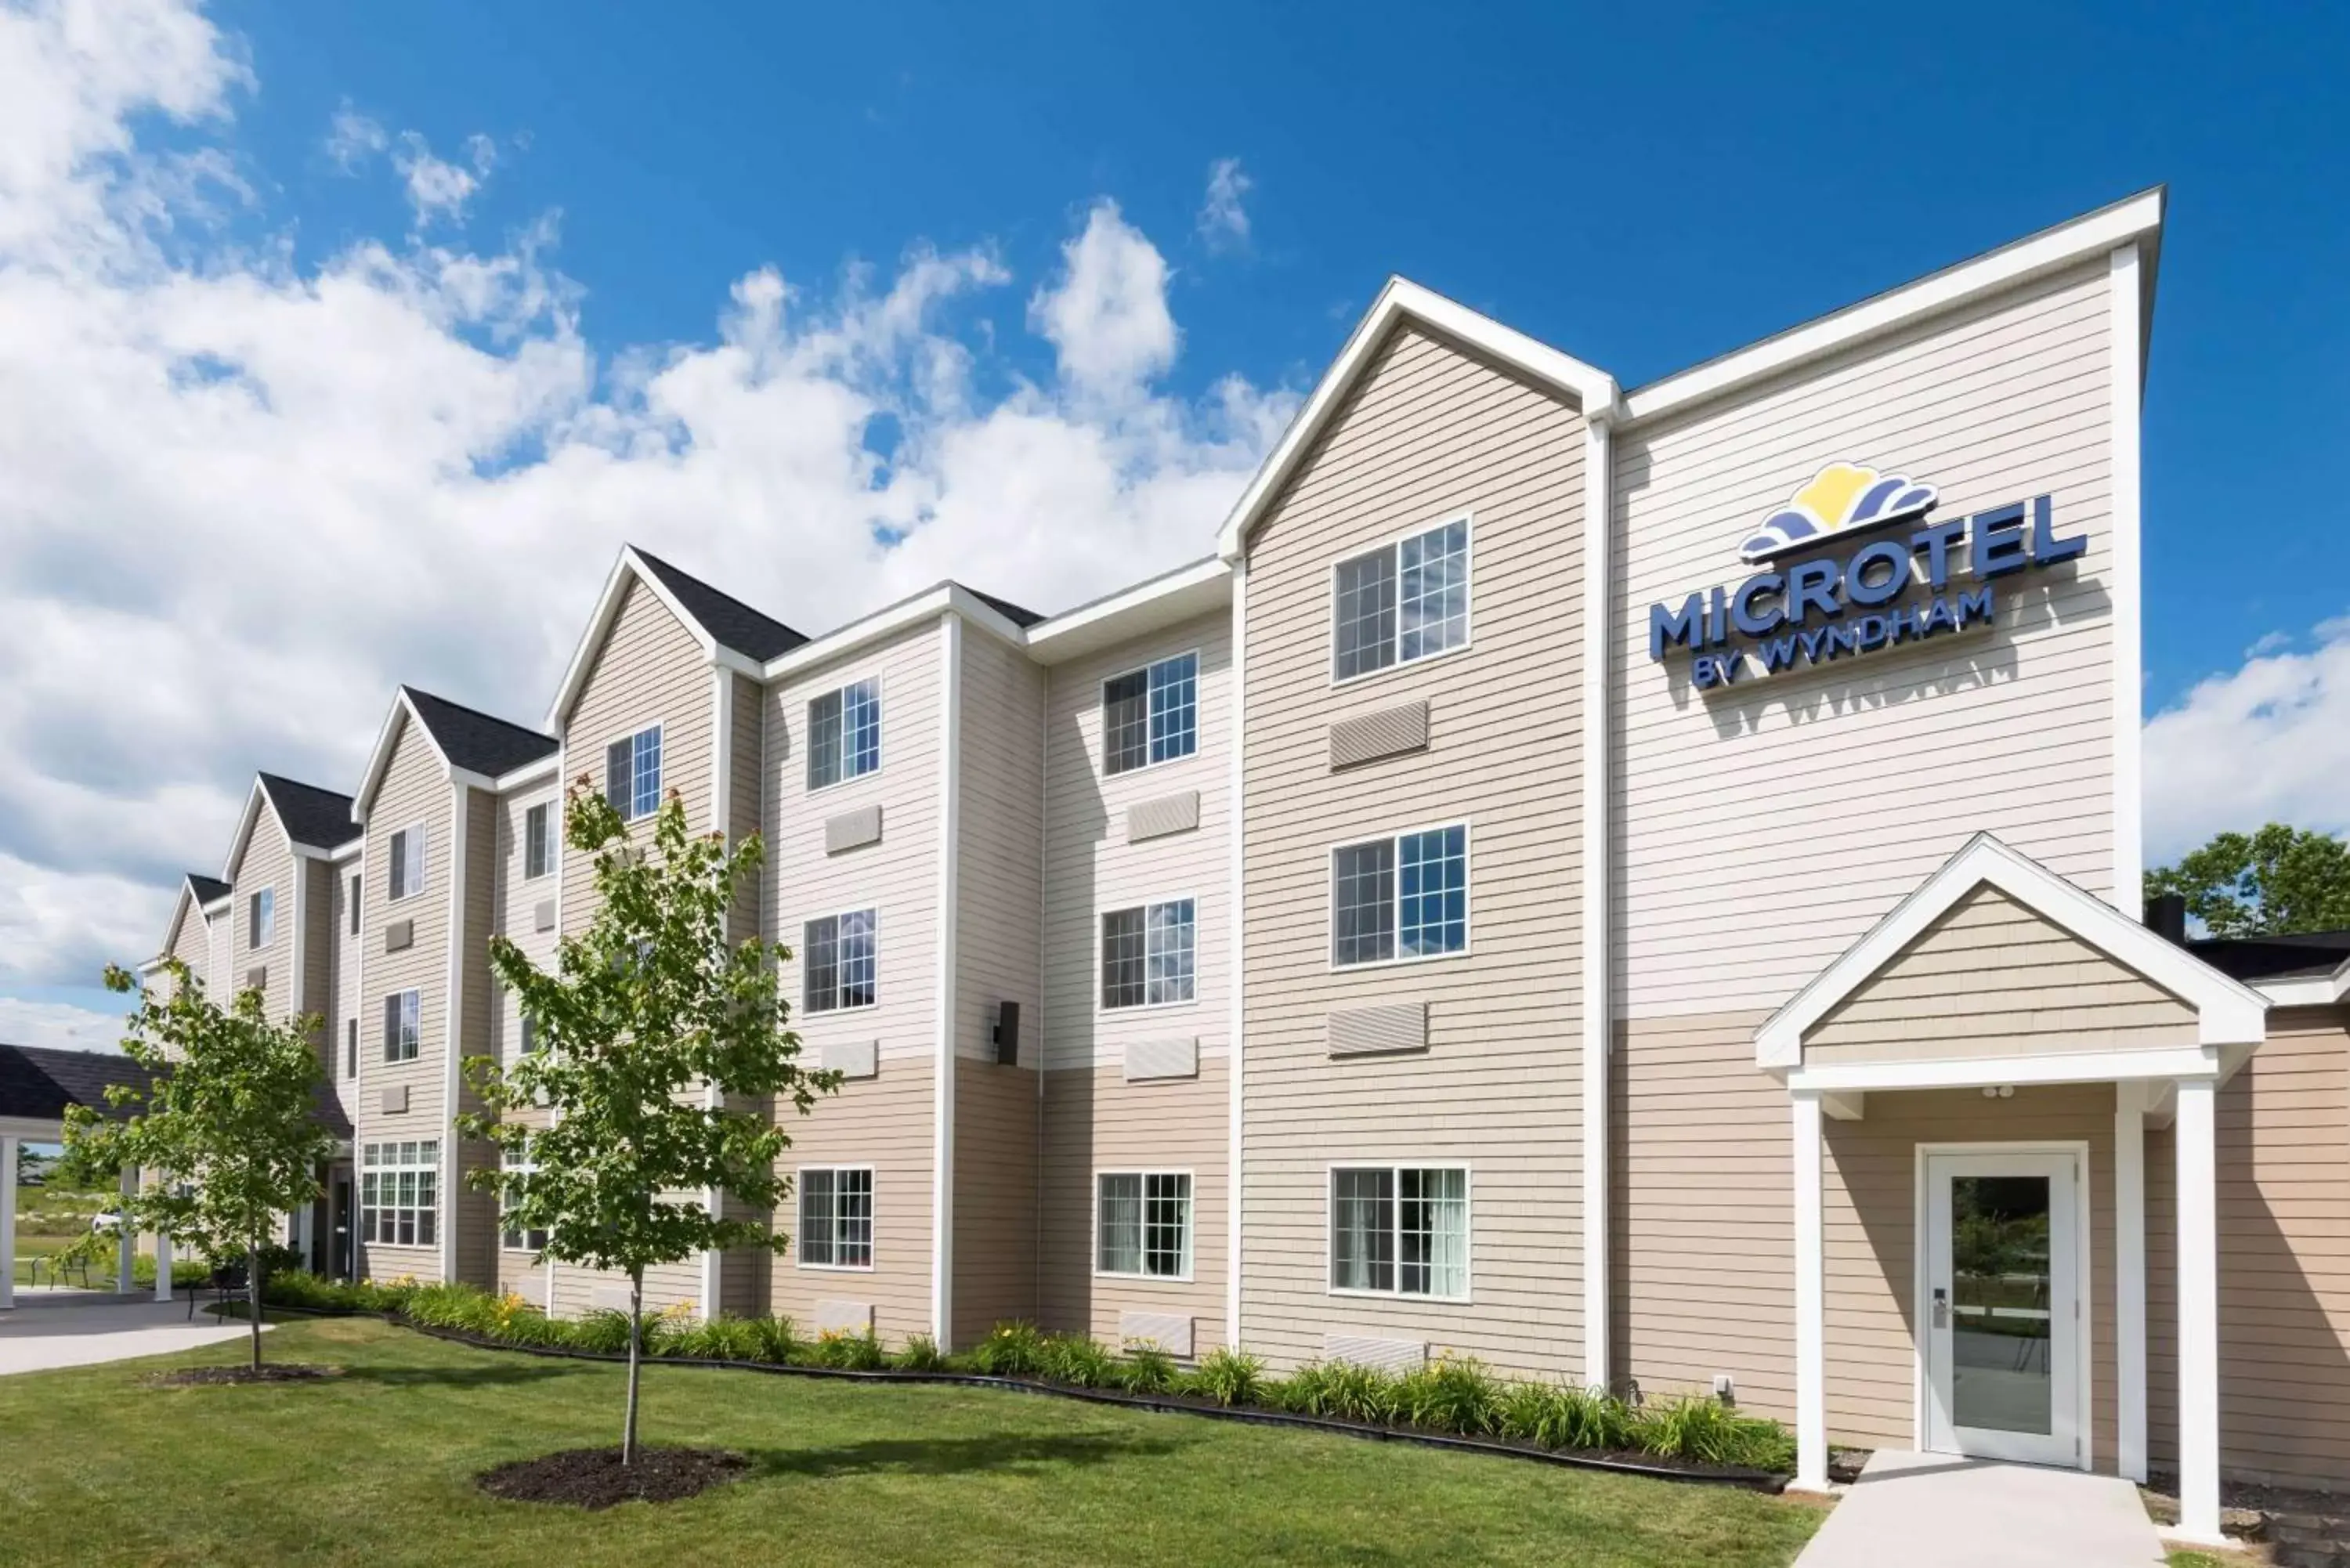 Property Building in Microtel Inn & Suites Windham